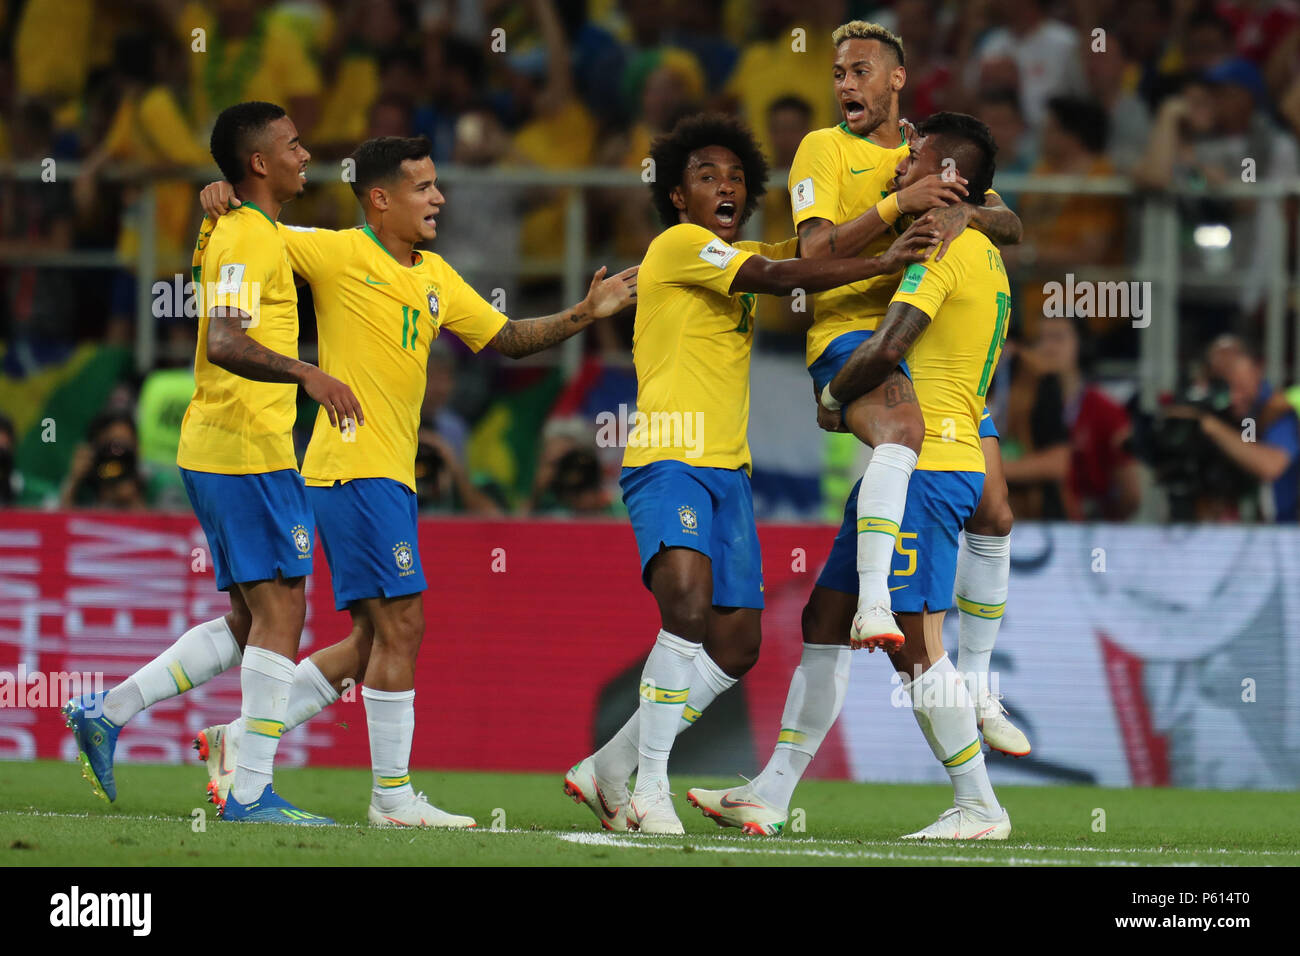 Gabriel Jesus, Philippe Coutinho, Willian, Neymar, Paulinho SERBIA V BRAZIL SERBIA V BRAZIL, 2018 FIFA WORLD CUP RUSSIA 27 June 2018 GBC8963 2018 FIFA World Cup Russia Spartak Stadium Moscow STRICTLY EDITORIAL USE ONLY. If The Player/Players Depicted In This Image Is/Are Playing For An English Club Or The England National Team. Then This Image May Only Be Used For Editorial Purposes. No Commercial Use. The Following Usages Are Also Restricted EVEN IF IN AN EDITORIAL CONTEXT: Use in conjuction with, or part of, any unauthorized audio, video, data, fixture lists, club/league lo Stock Photo